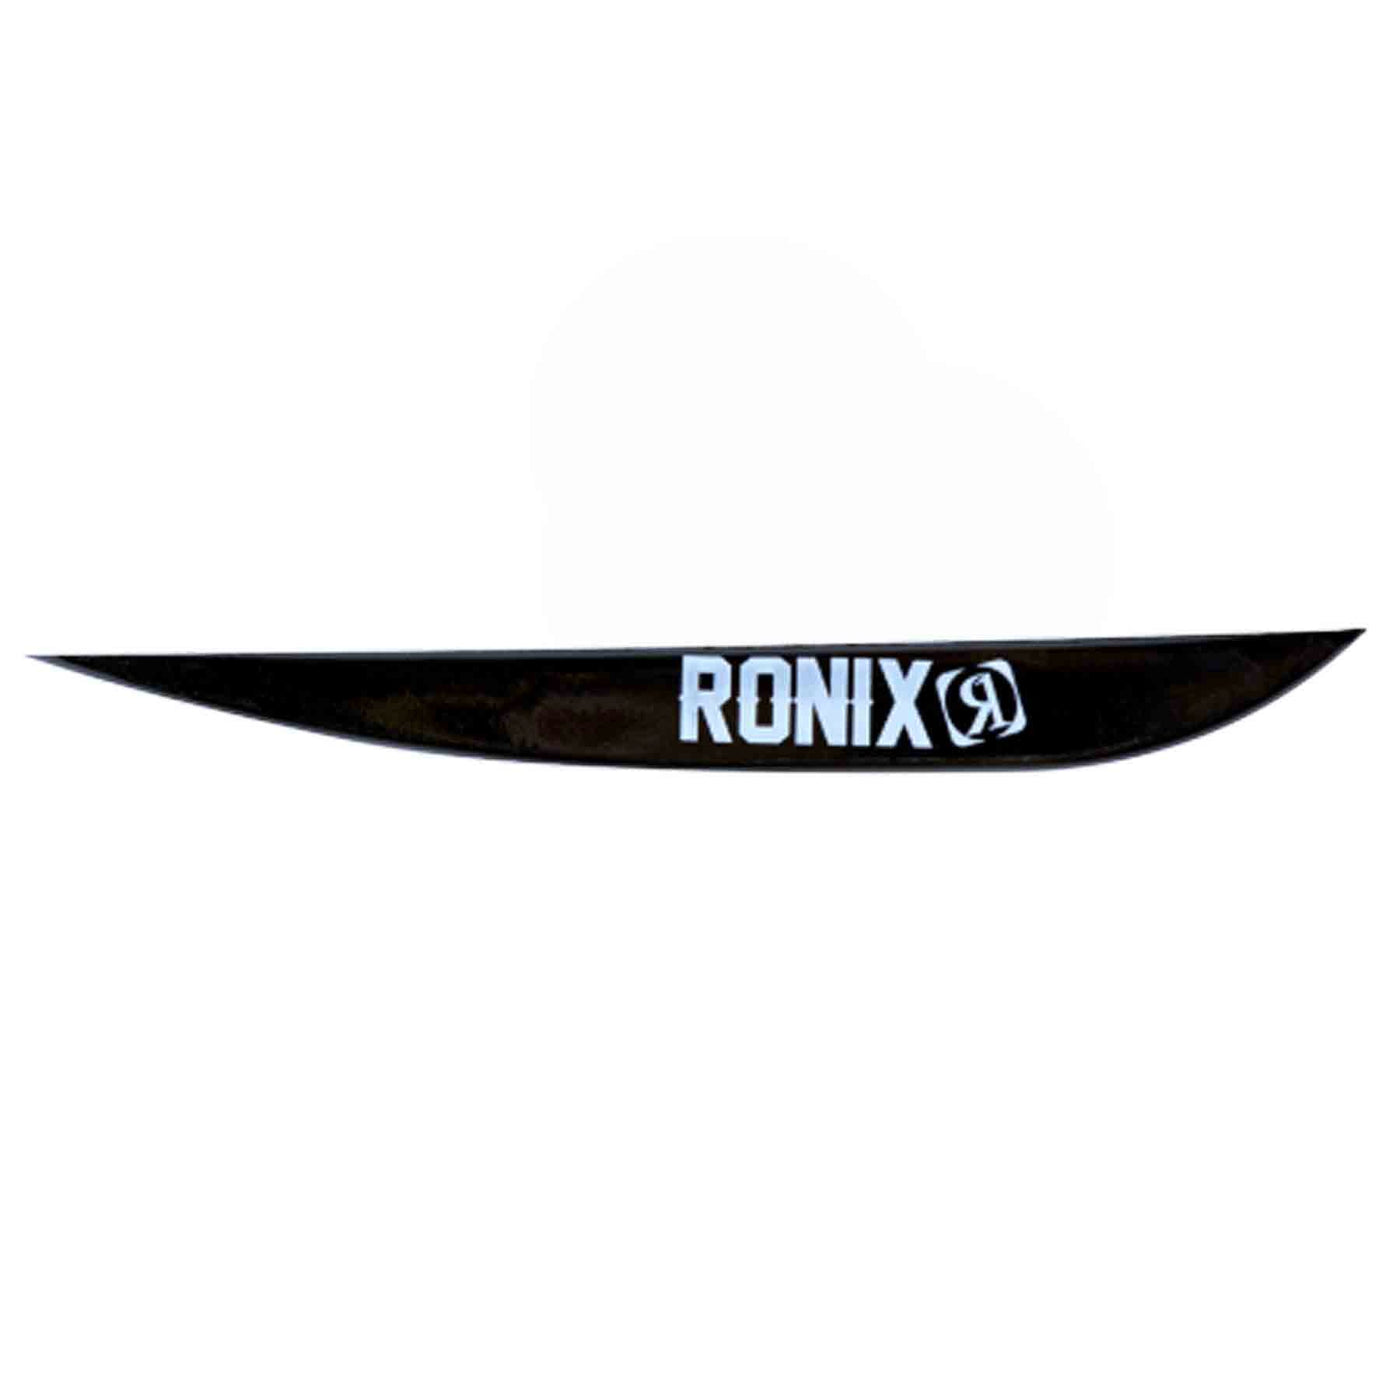 Ronix Asym Wakeboard Fins (2 Pack) RONIX